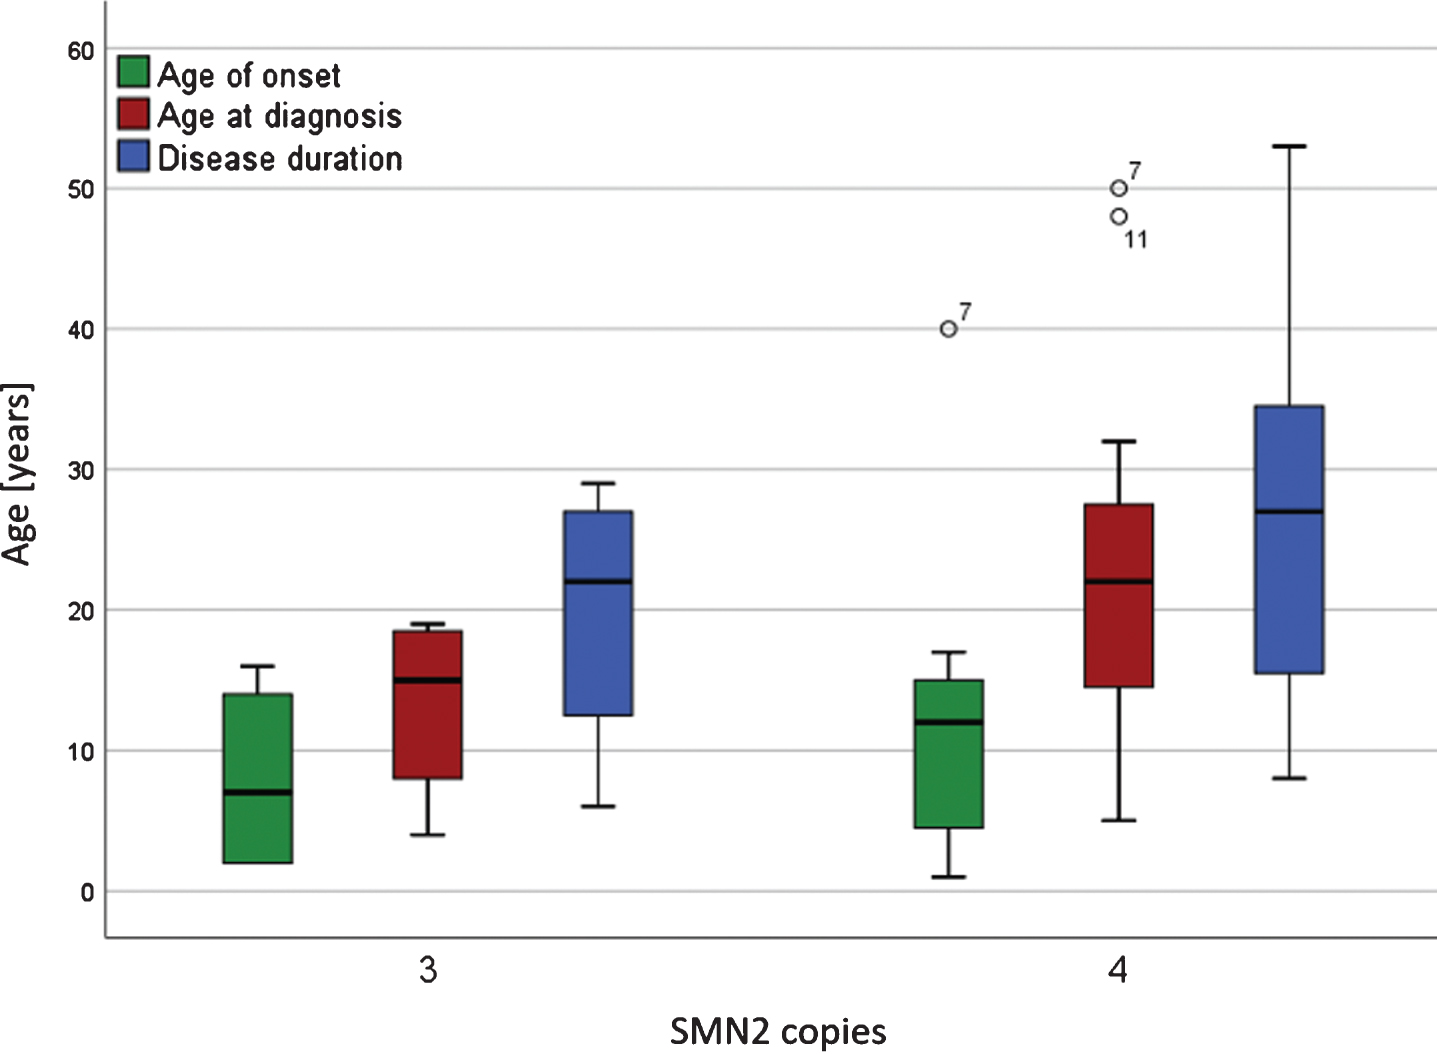 Age of symptom onset, age at diagnosis and duration of disease for patients with 3 and 4 SMN2 copies. Boxplots of symptom onset, age at diagnosis and duration of disease for patients with 3 and 4 SMN2 copies. Black circles indicate outliers with patient numbers. There were no significant differences between the groups with 3 or 4 SNM2 copies in the age of onset, age at diagnosis and disease duration until the start of first treatment with Nusinersen (α> 0.05).